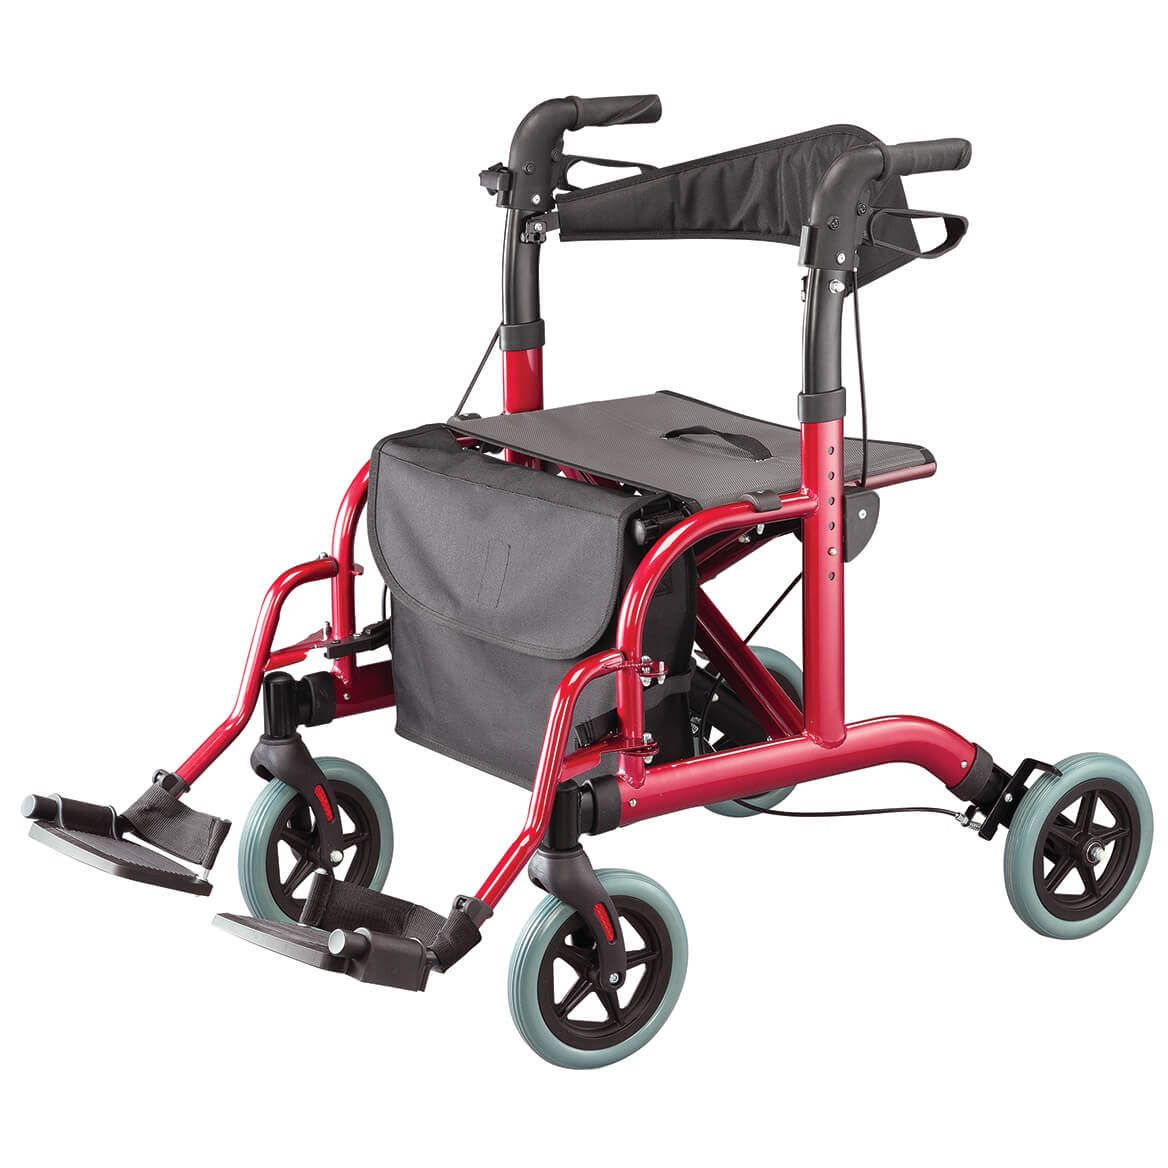 Rollator and Transport Chair in 1            XL + '-' + 367537